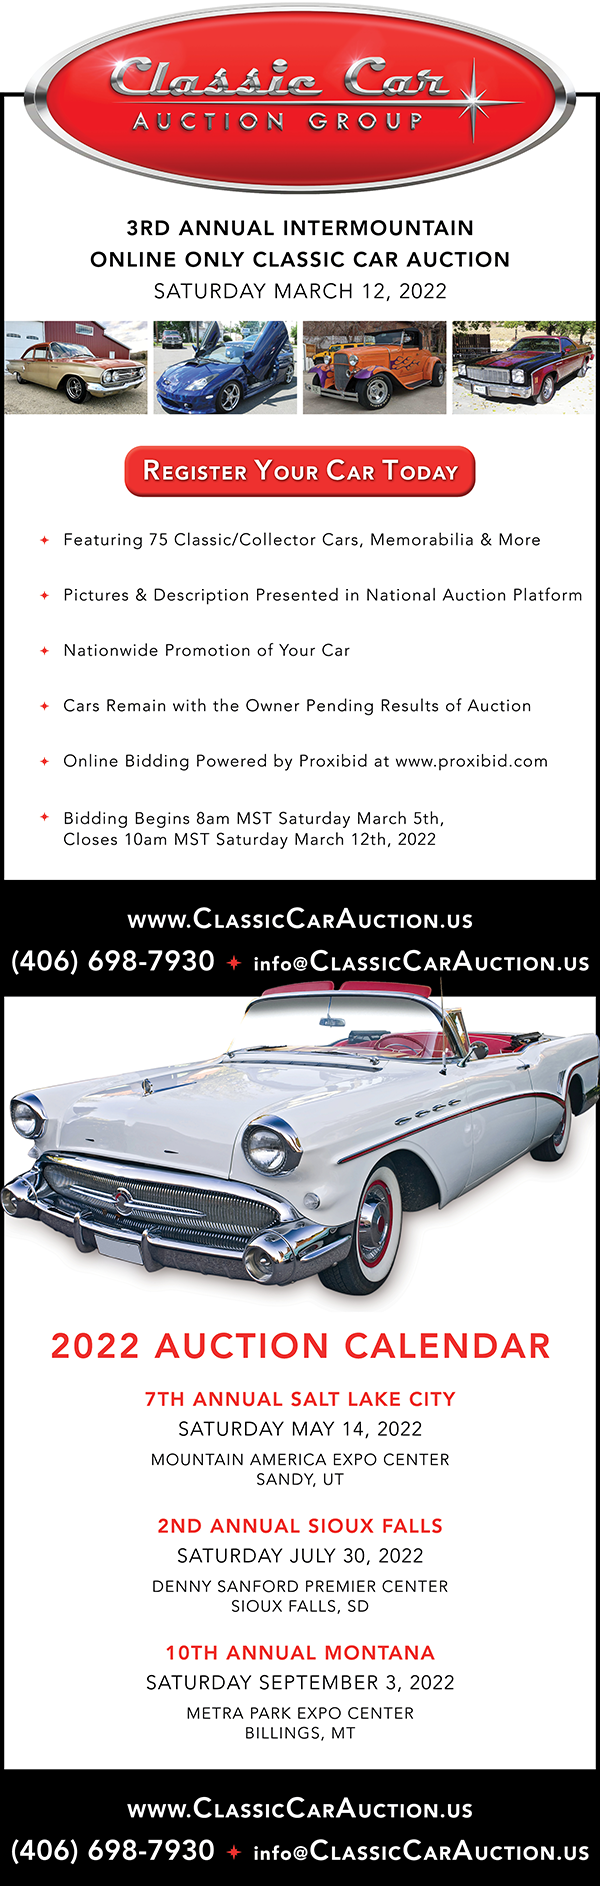 2022-01_Classic-Car-Auction_Email_600x1886-px-wide_V3